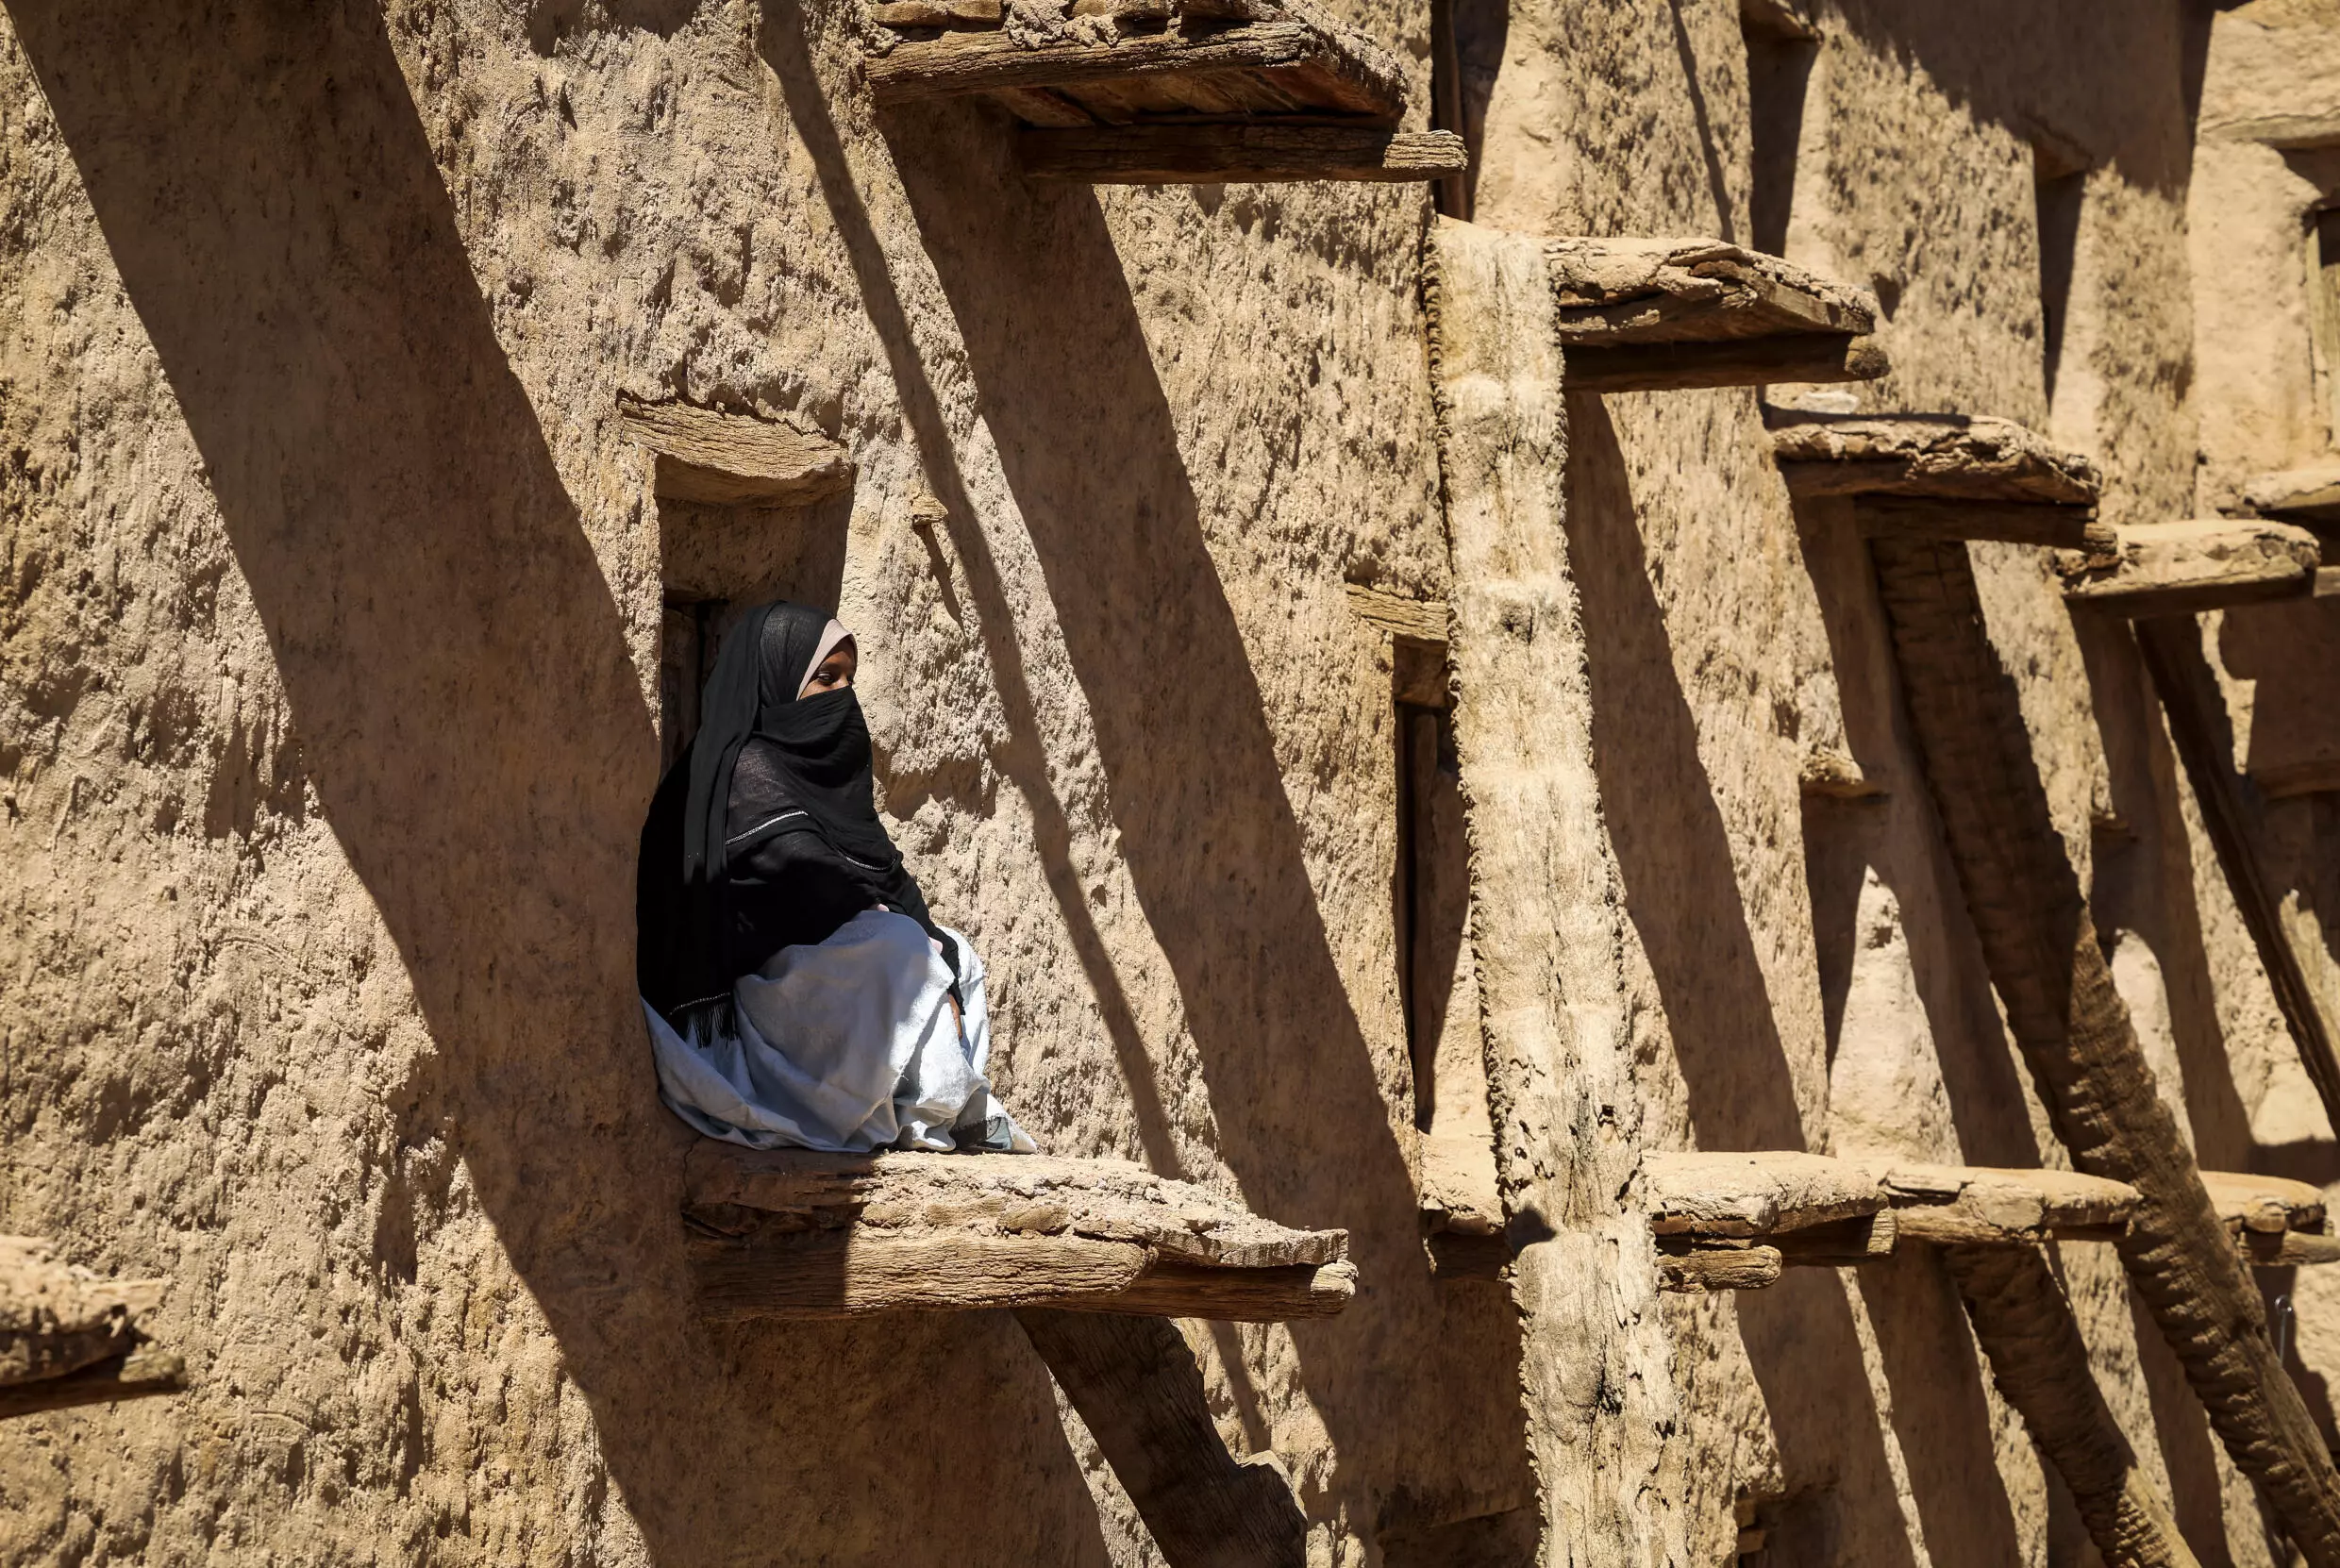 Unwritten laws have kept these granaries sacred and inviolable spaces, not only storing crops to use in drought but also protecting them from attacks. Photo: AFP